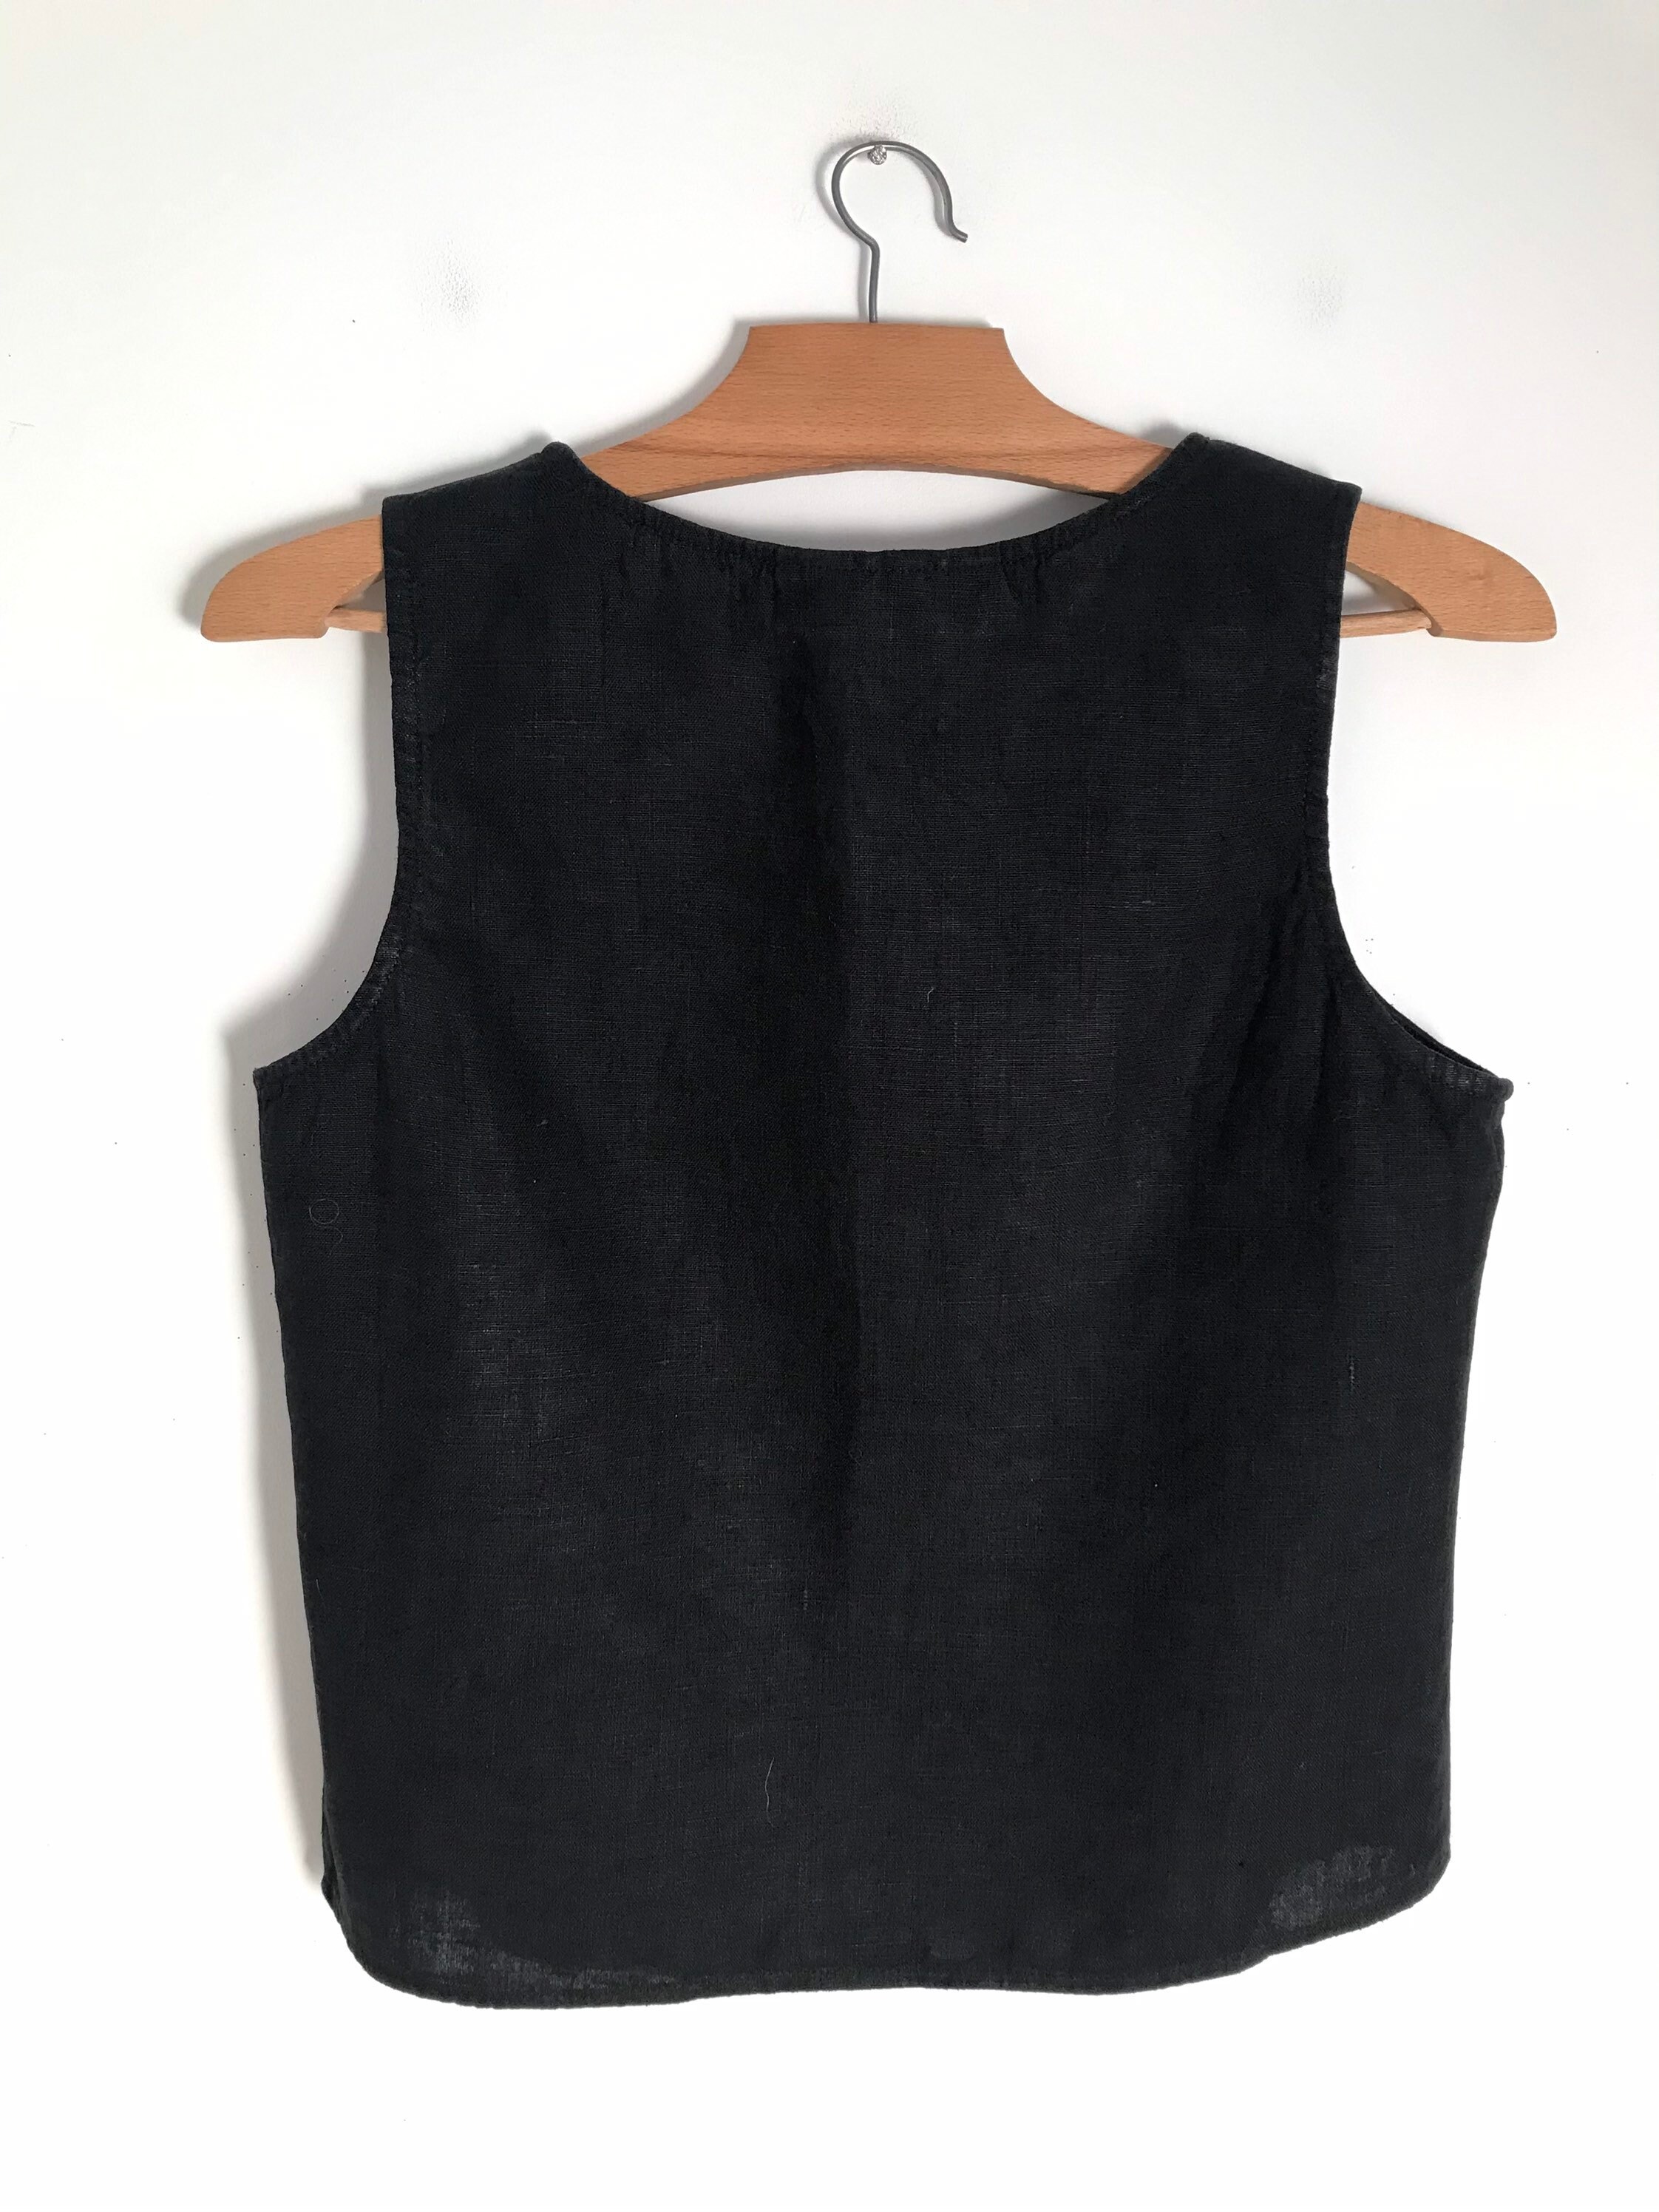 Vintage black linen tank top with easy fit / xs / s / 1990s | Etsy